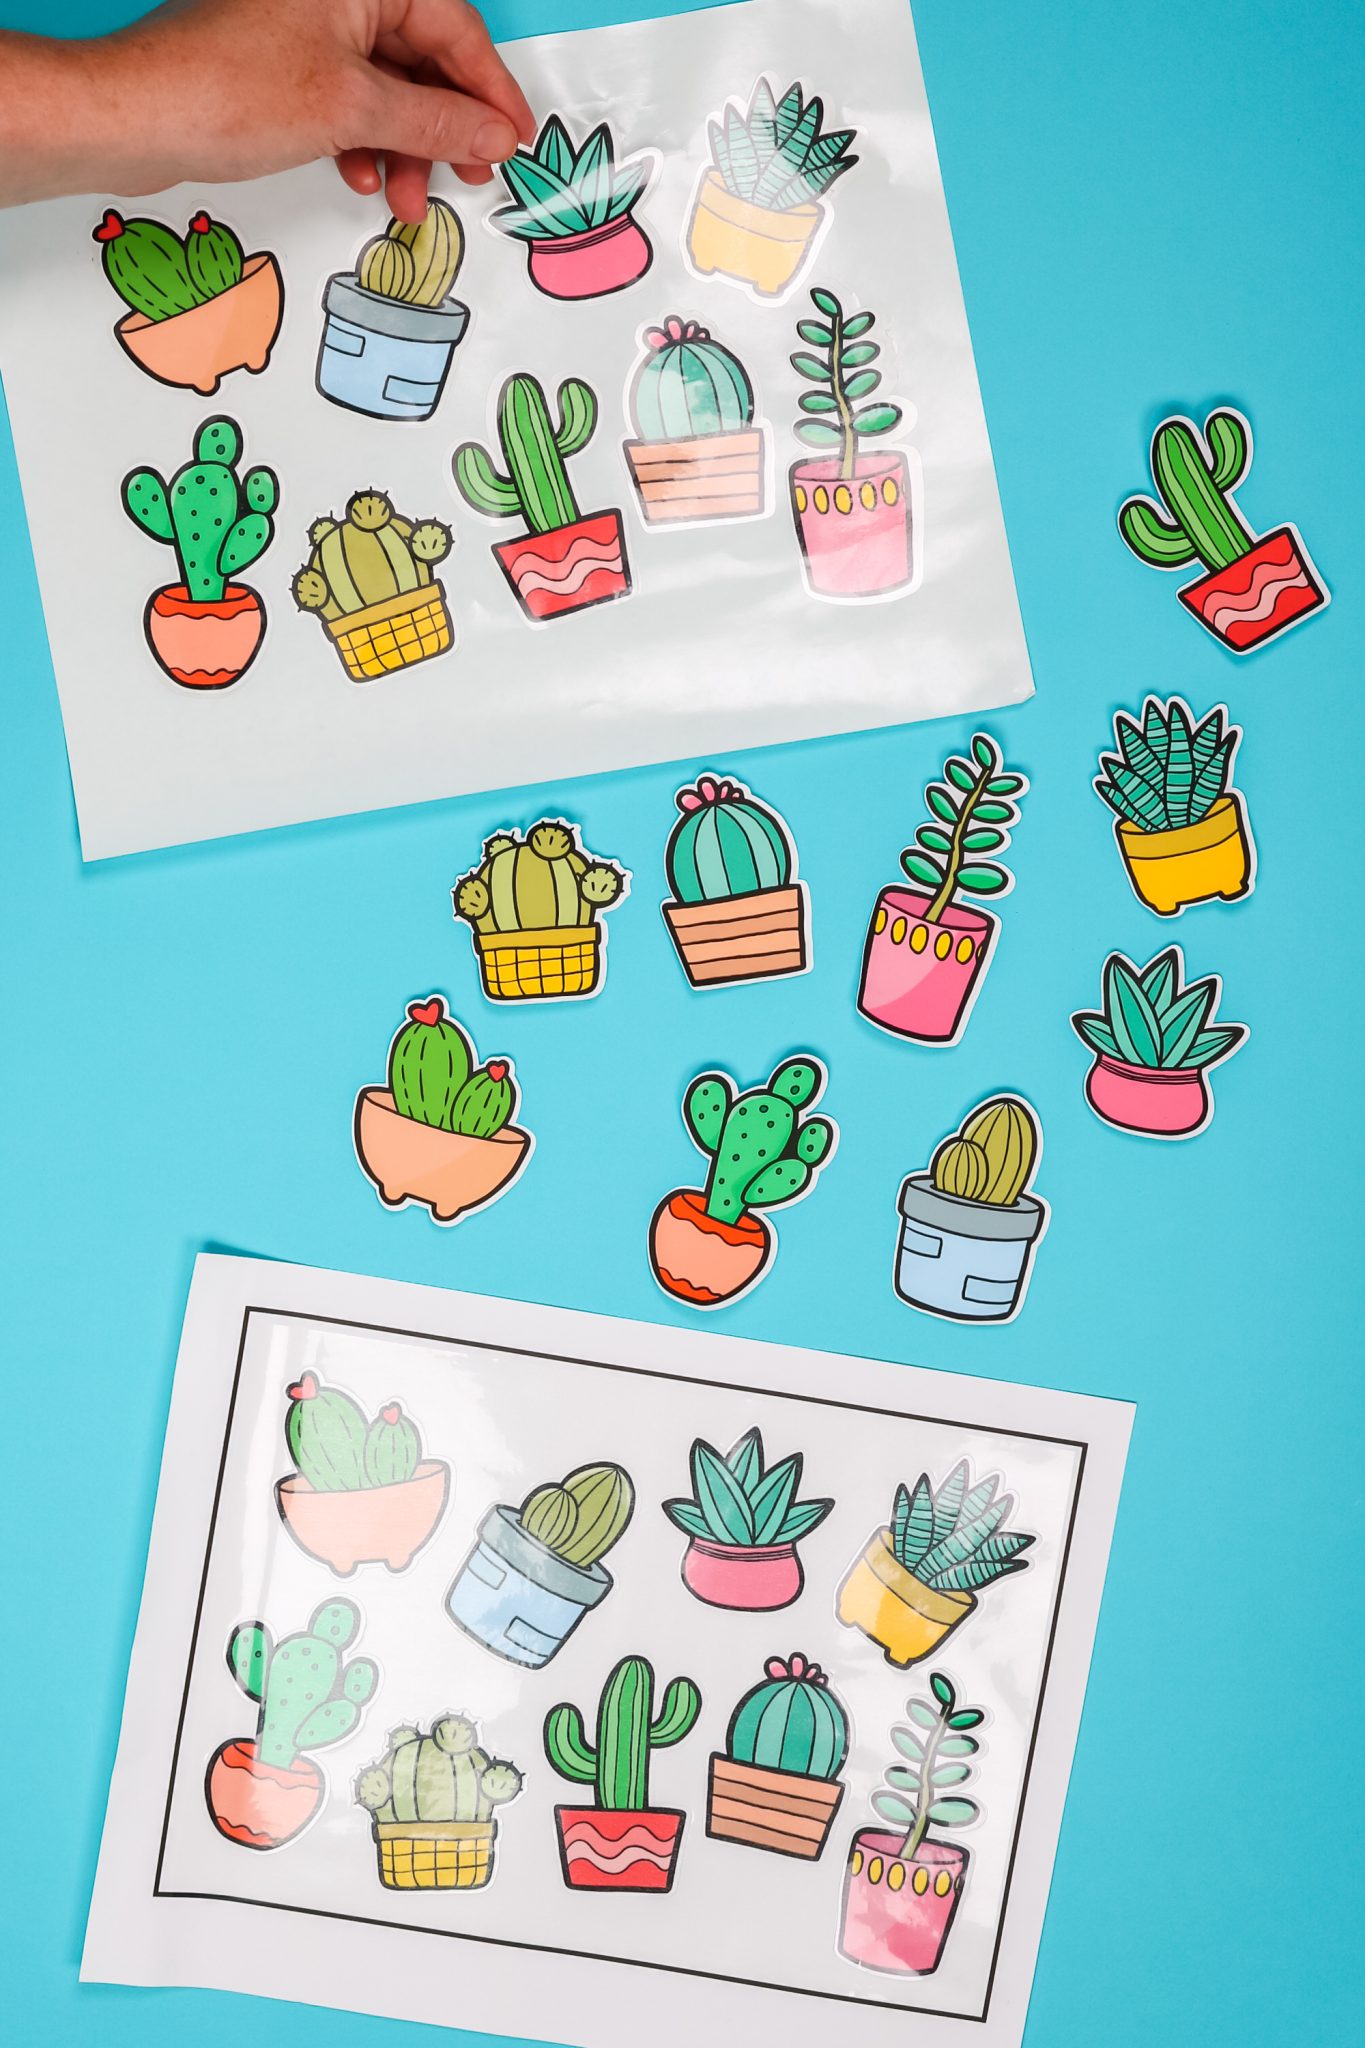 Cricut Laminate Stickers: Two Ways to Make Them - Angie Holden The